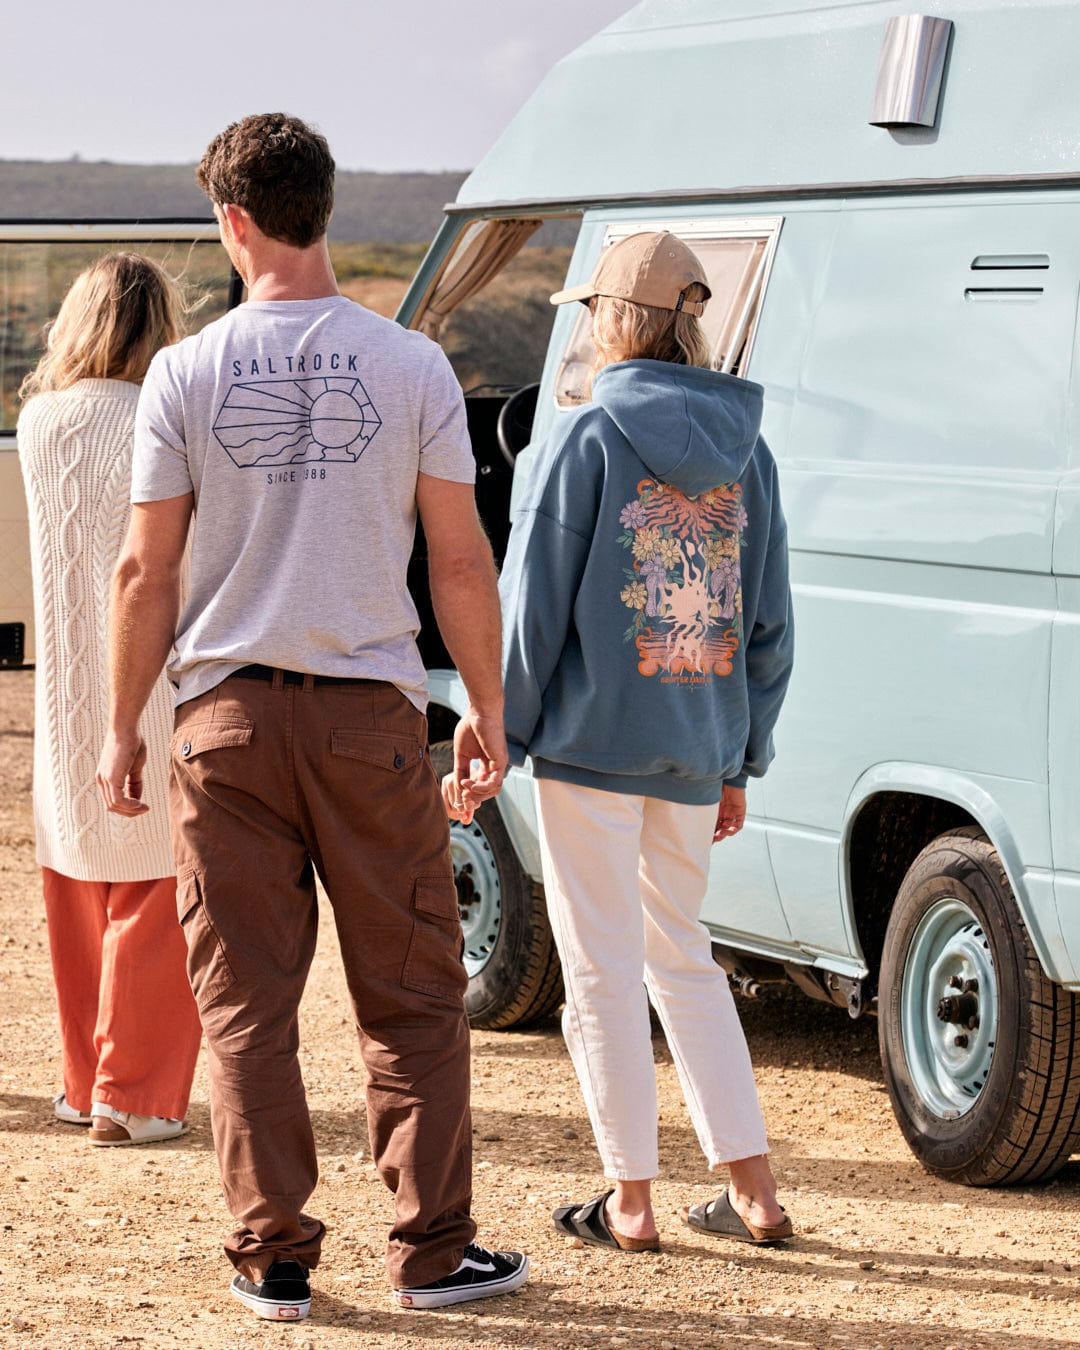 Three people standing next to a vintage van, dressed in casual attire with Saltrock branding, enjoying the outdoors in Godrevy 2 - Mens Cargo Trousers - Brown.